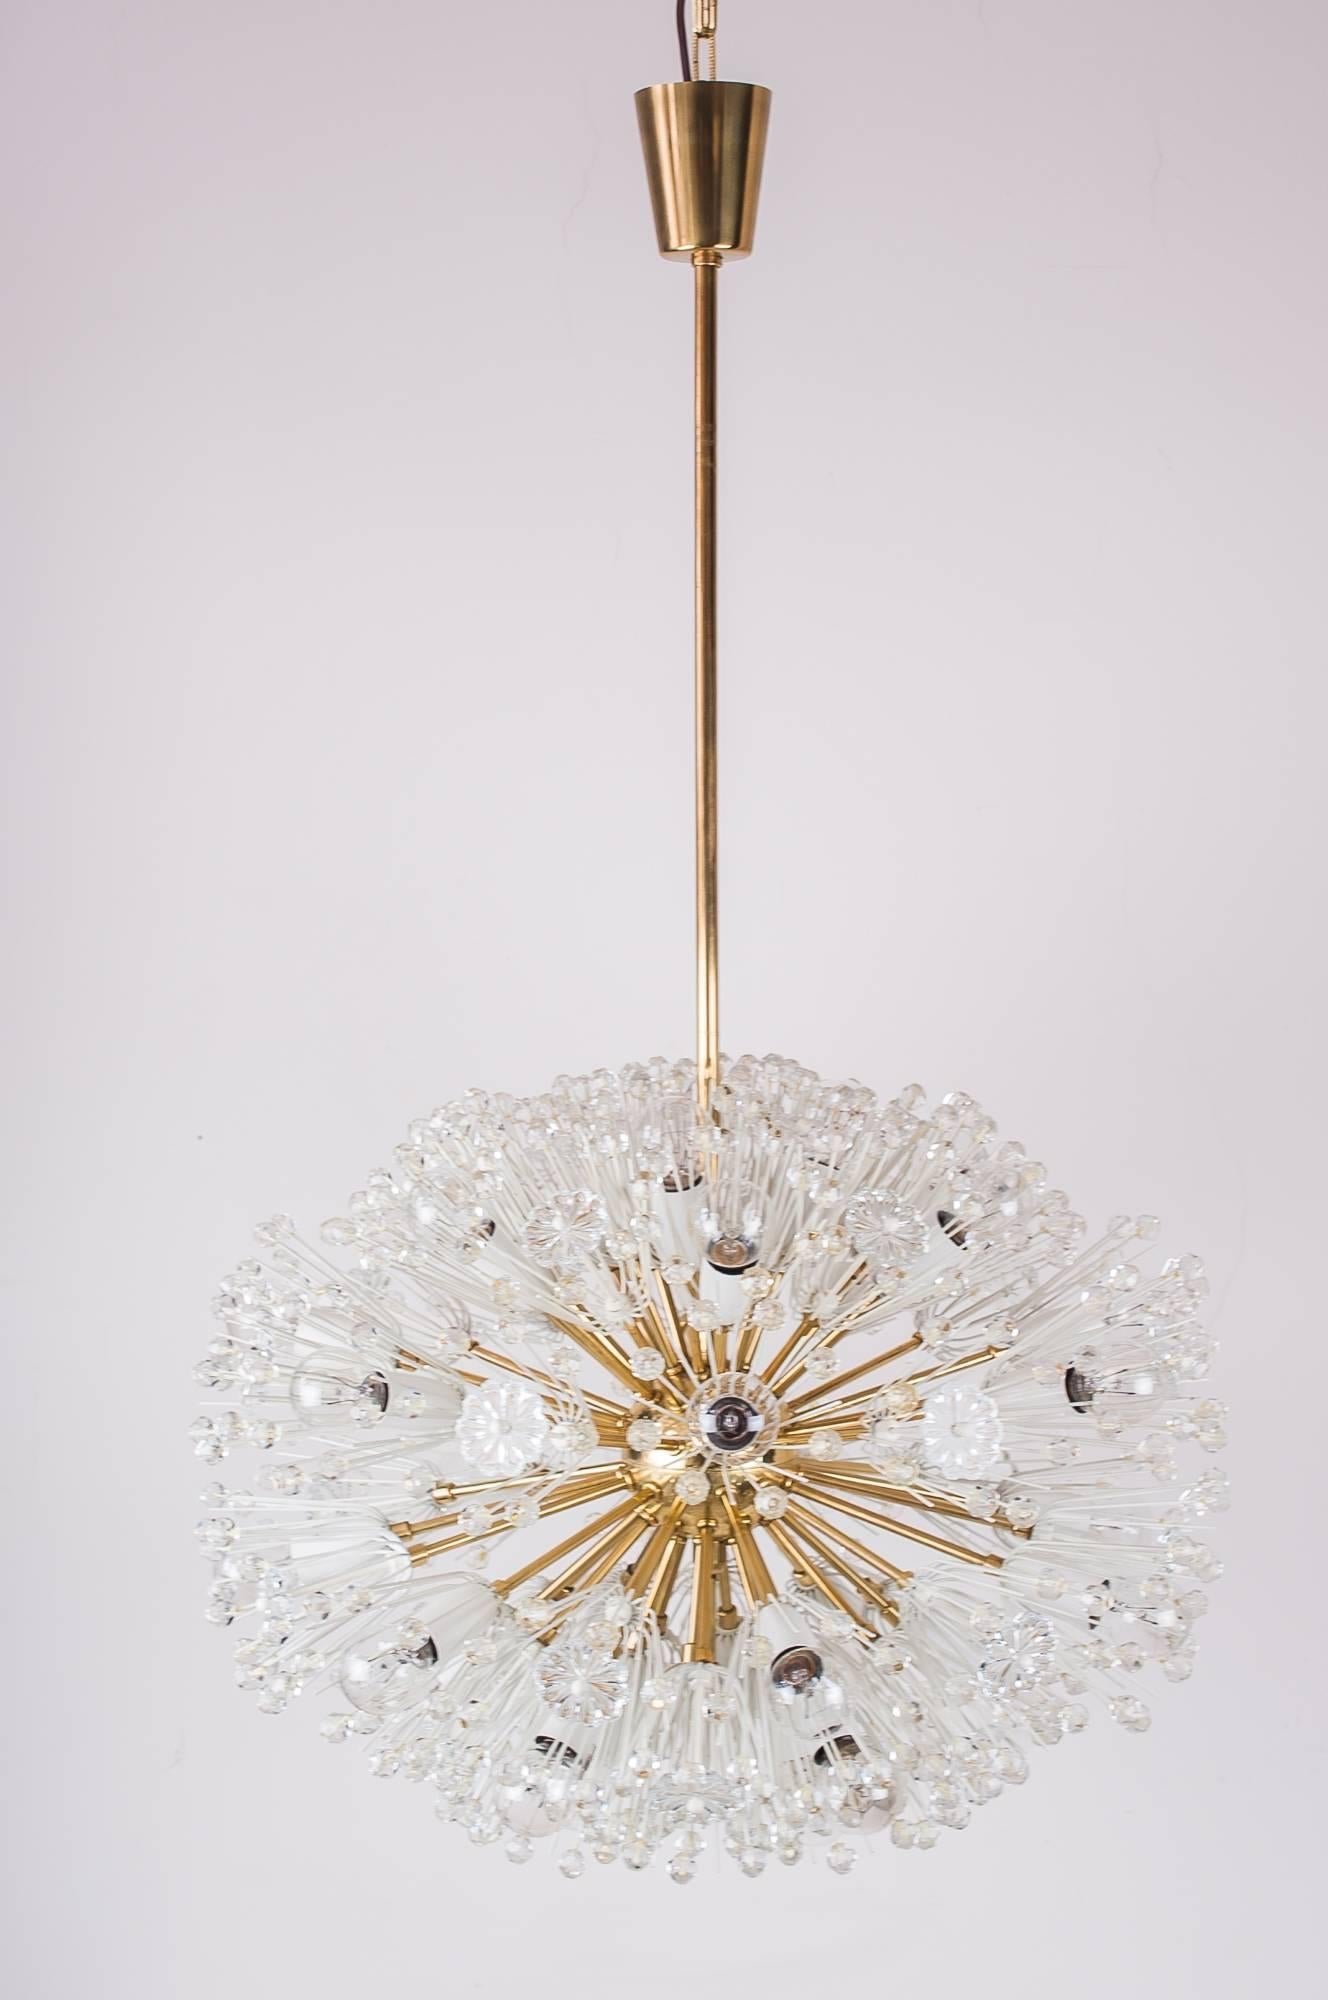 This glamorous delicate Sputnik chandelier is in excellent original condition, in complete working order.
Thirty-four-light 